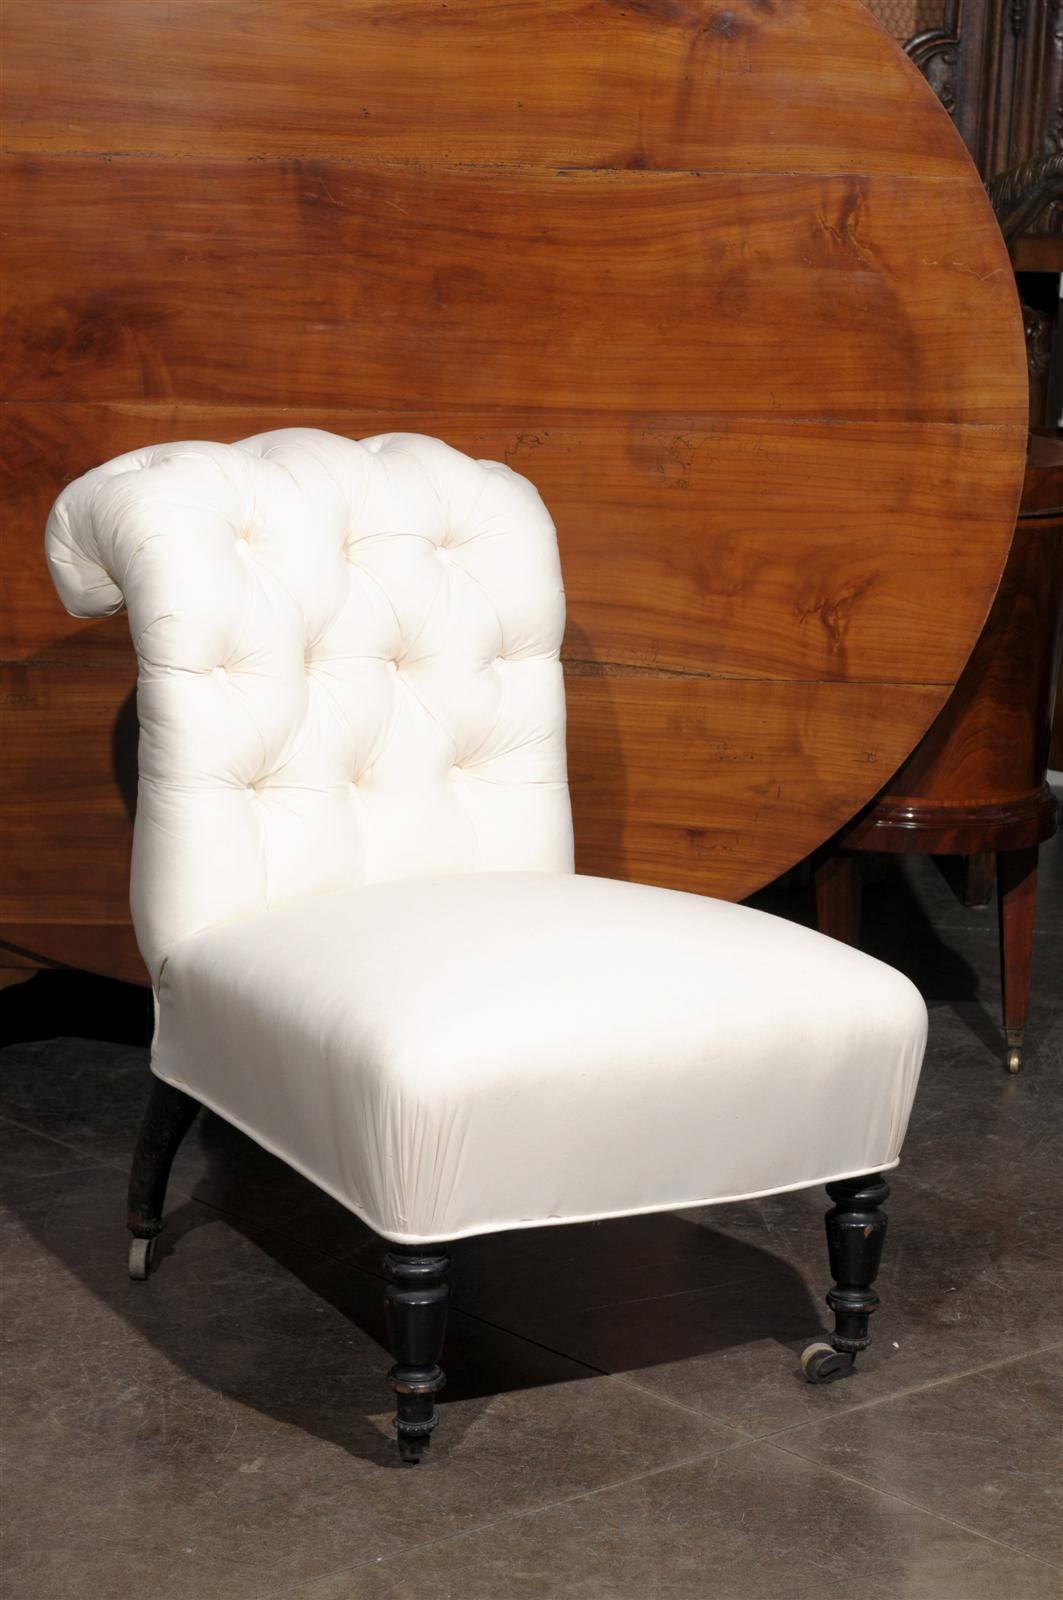 Unusual tufted English slipper chair with castors. New muslin upholstery.